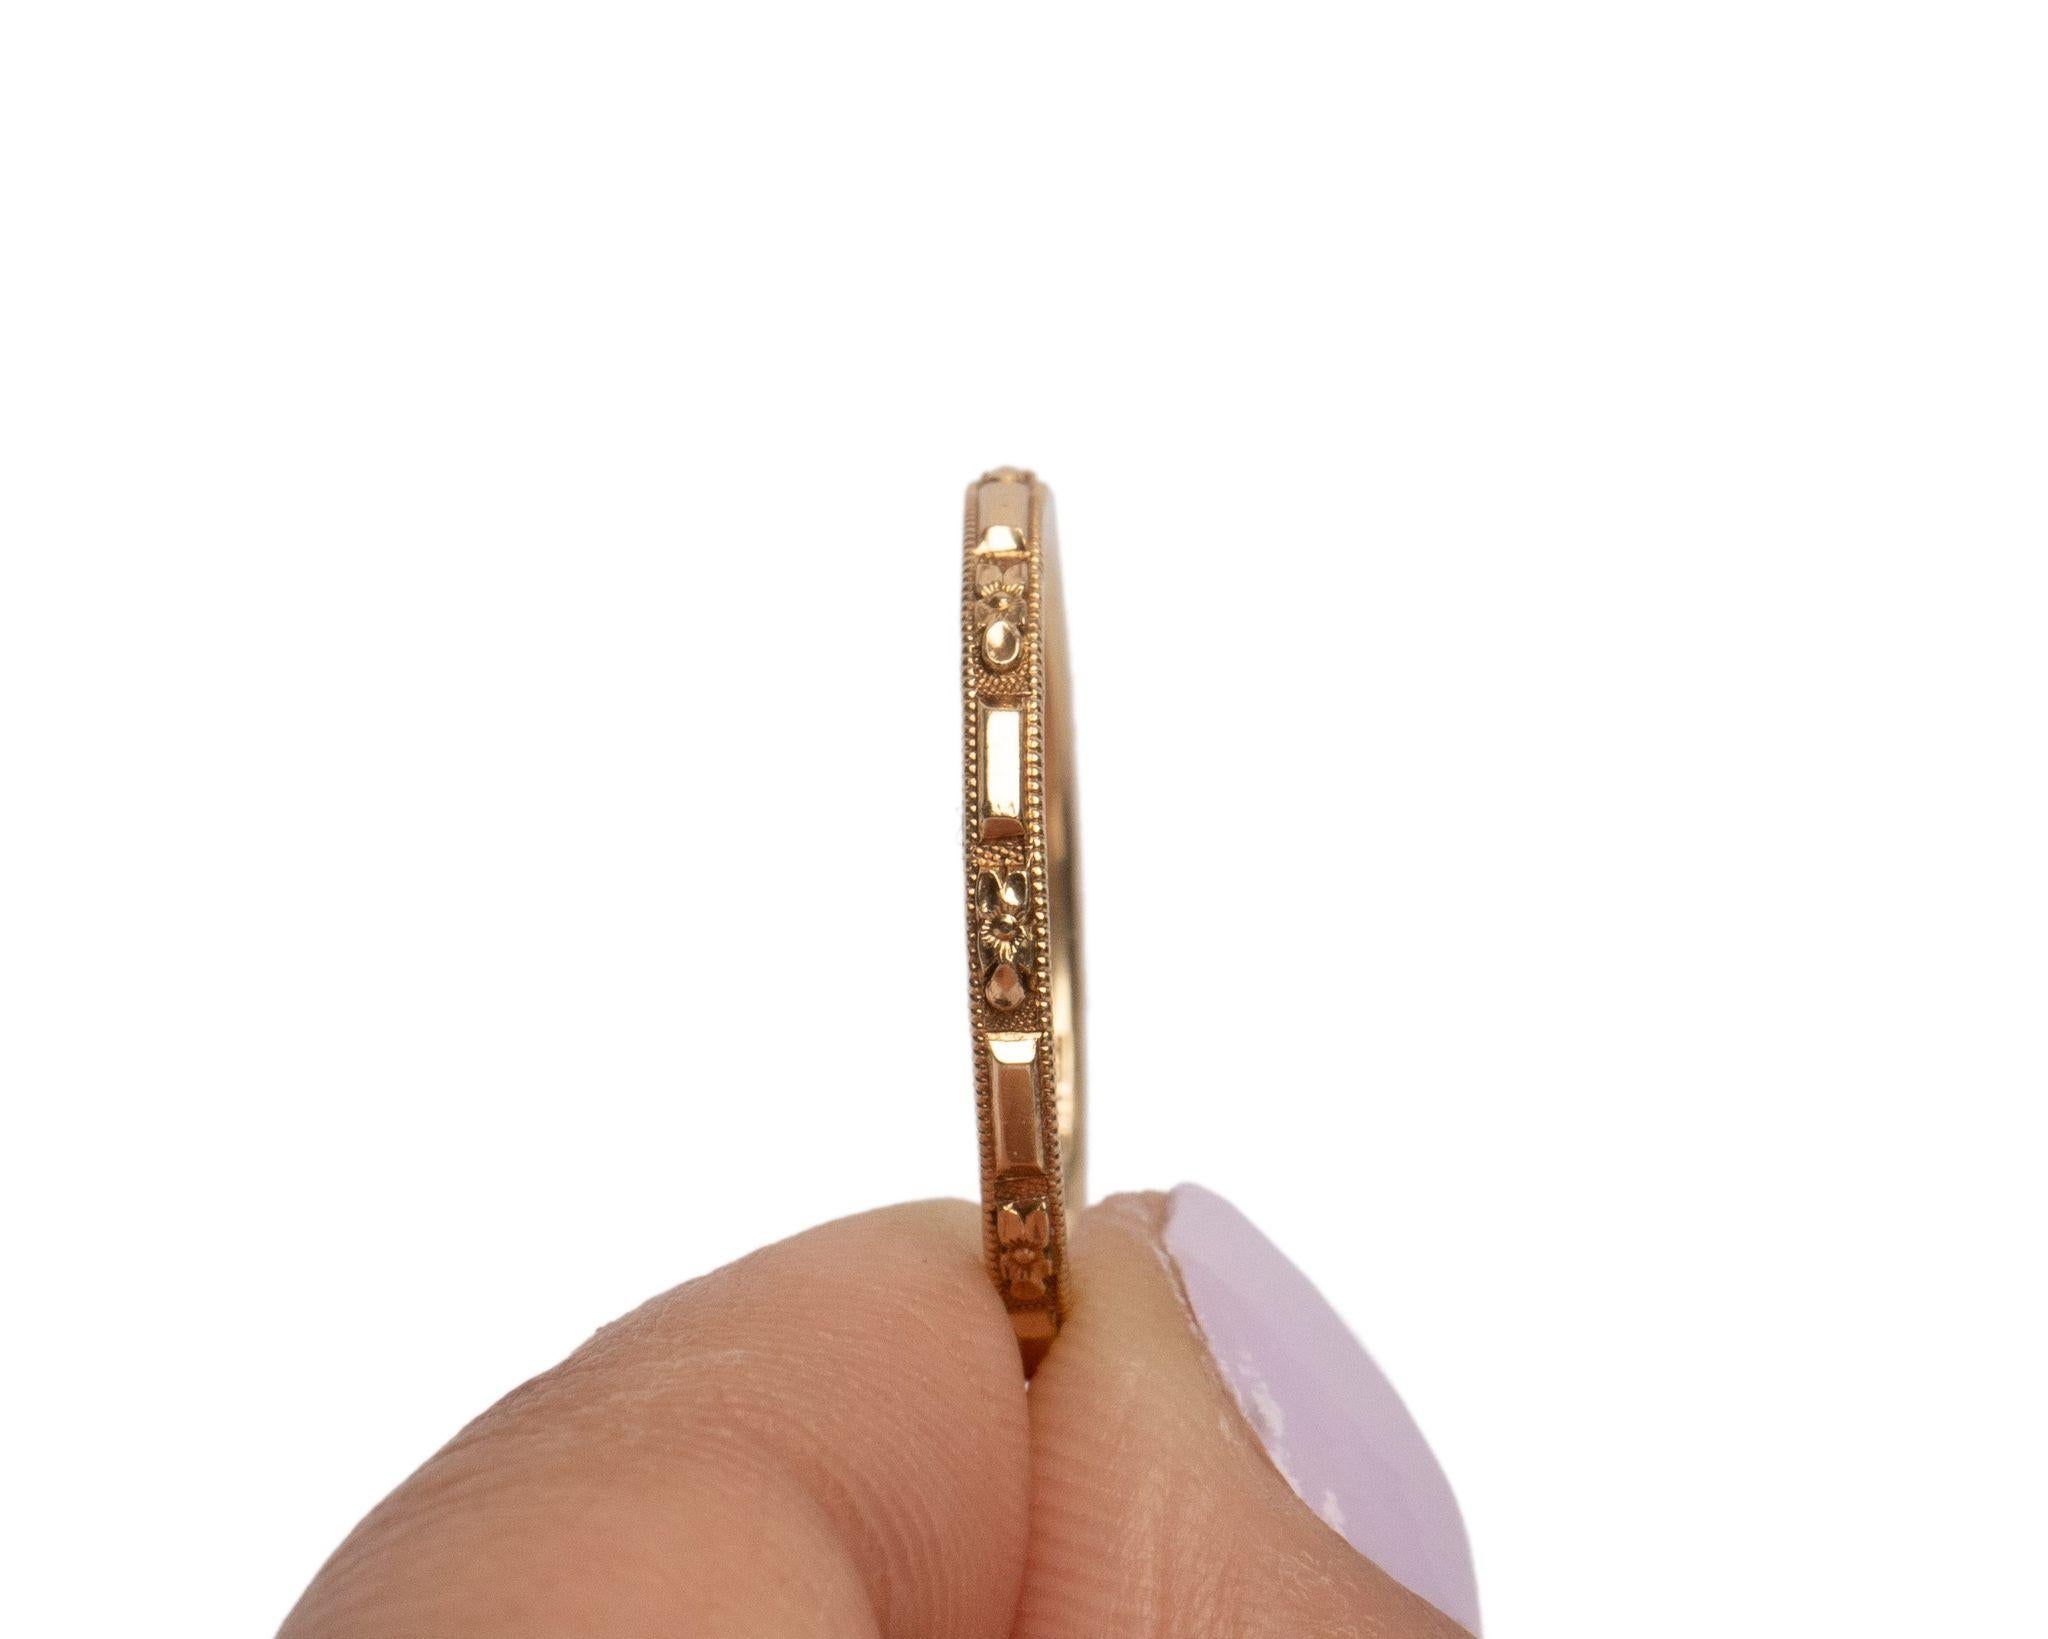 This piece is a genuine 1920's yellow gold Orange Blossom Traub wedding band! This beautiful dainty band is an excellent example of the early 20th-century style! Likely from the 1920's this Art Deco beauty features a floral carved design all of the